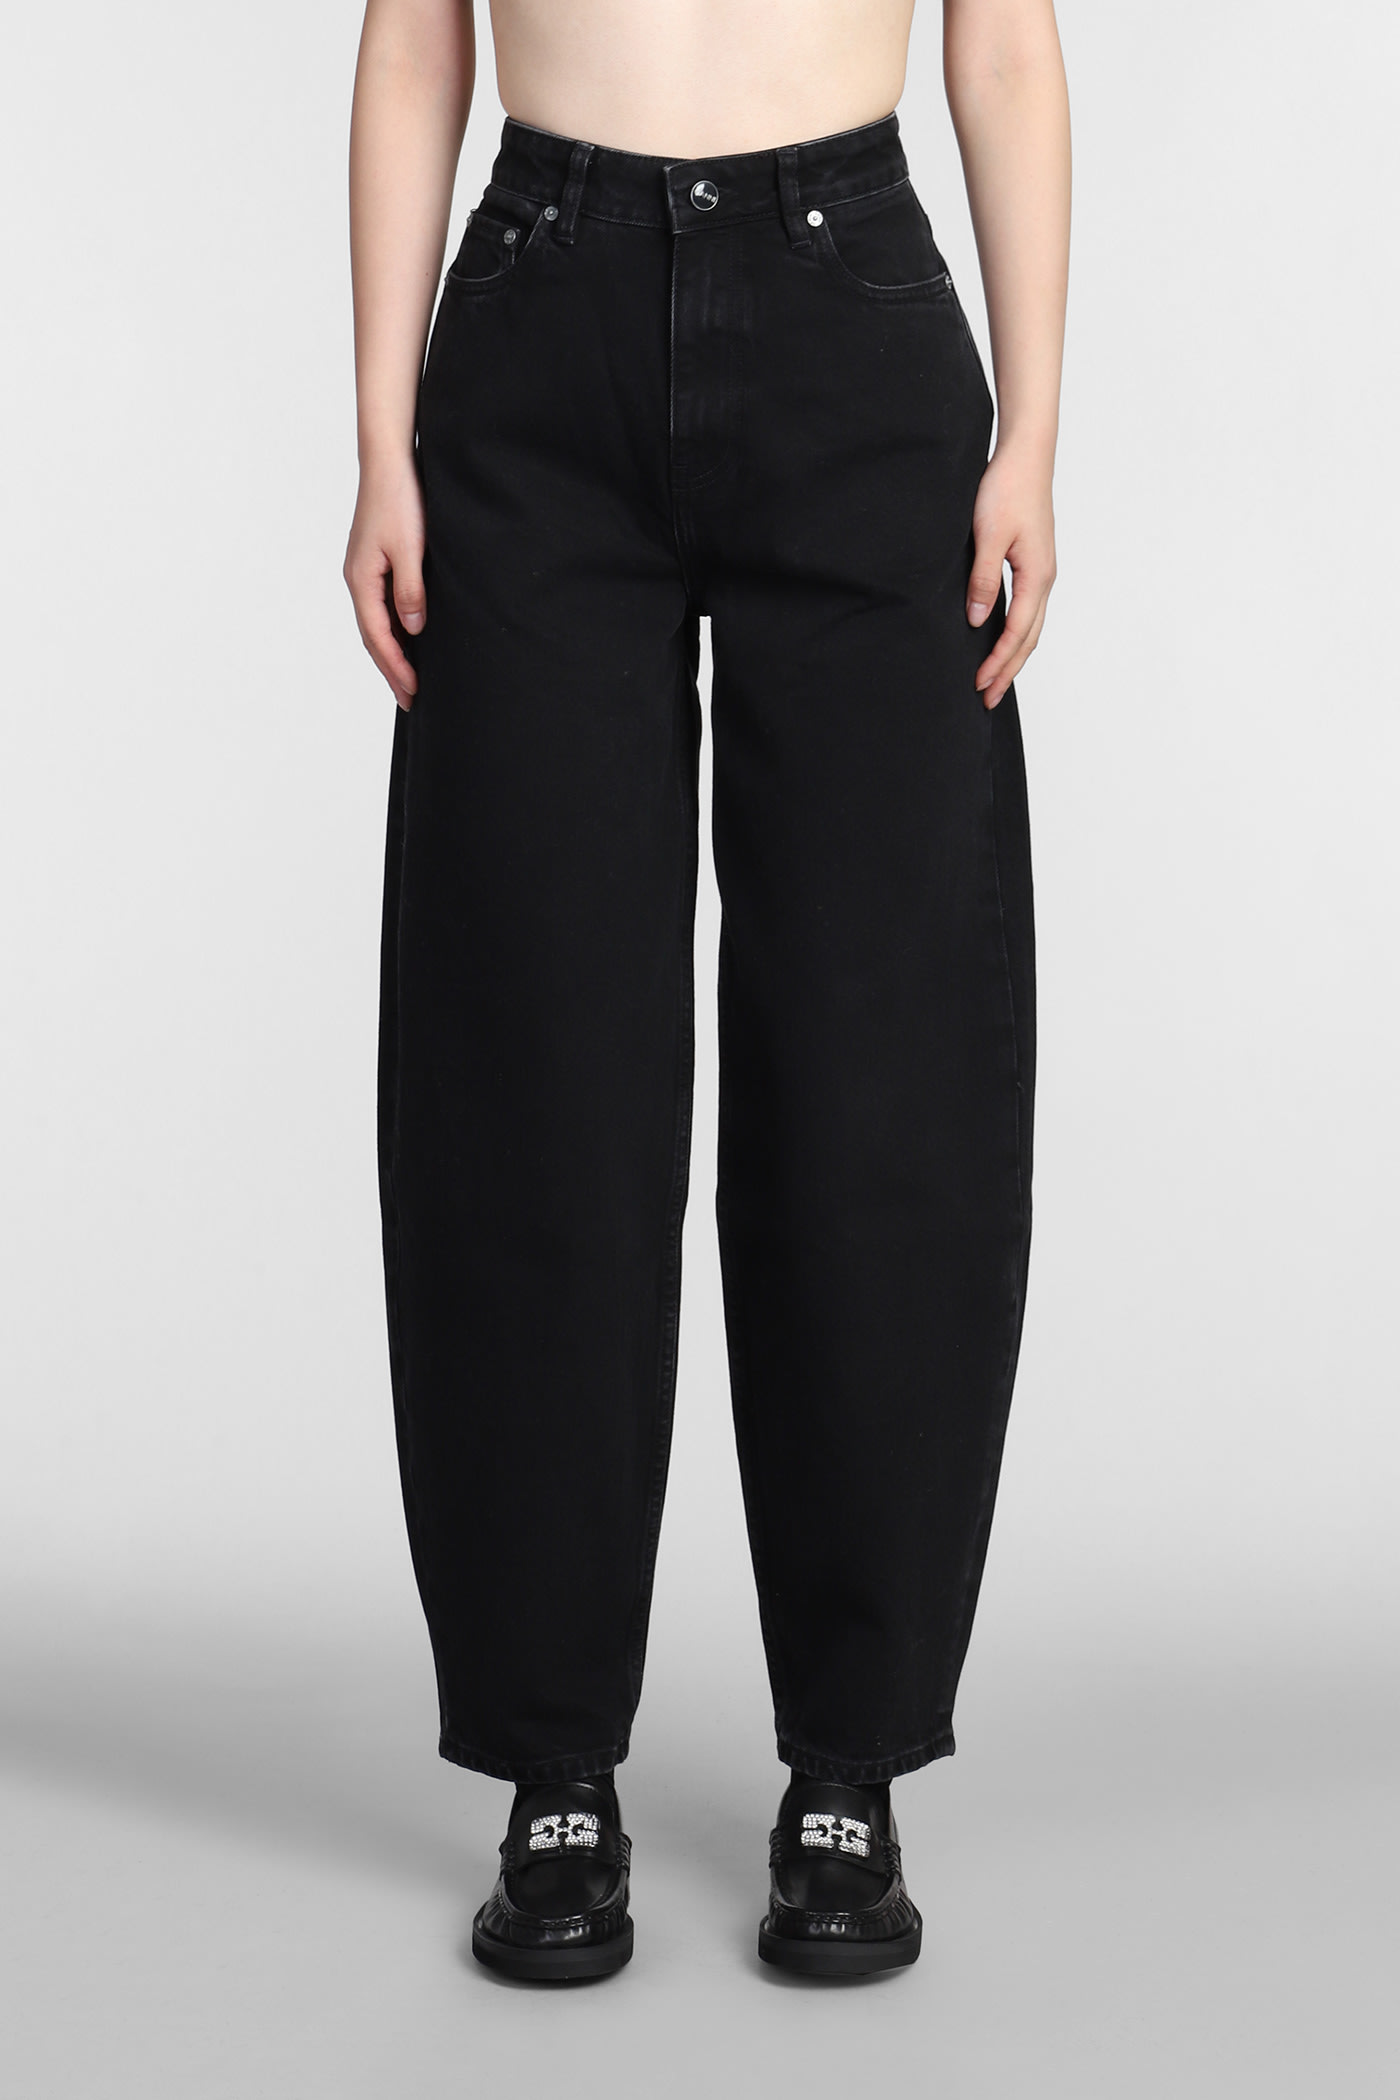 GANNI STARY JEANS IN BLACK COTTON